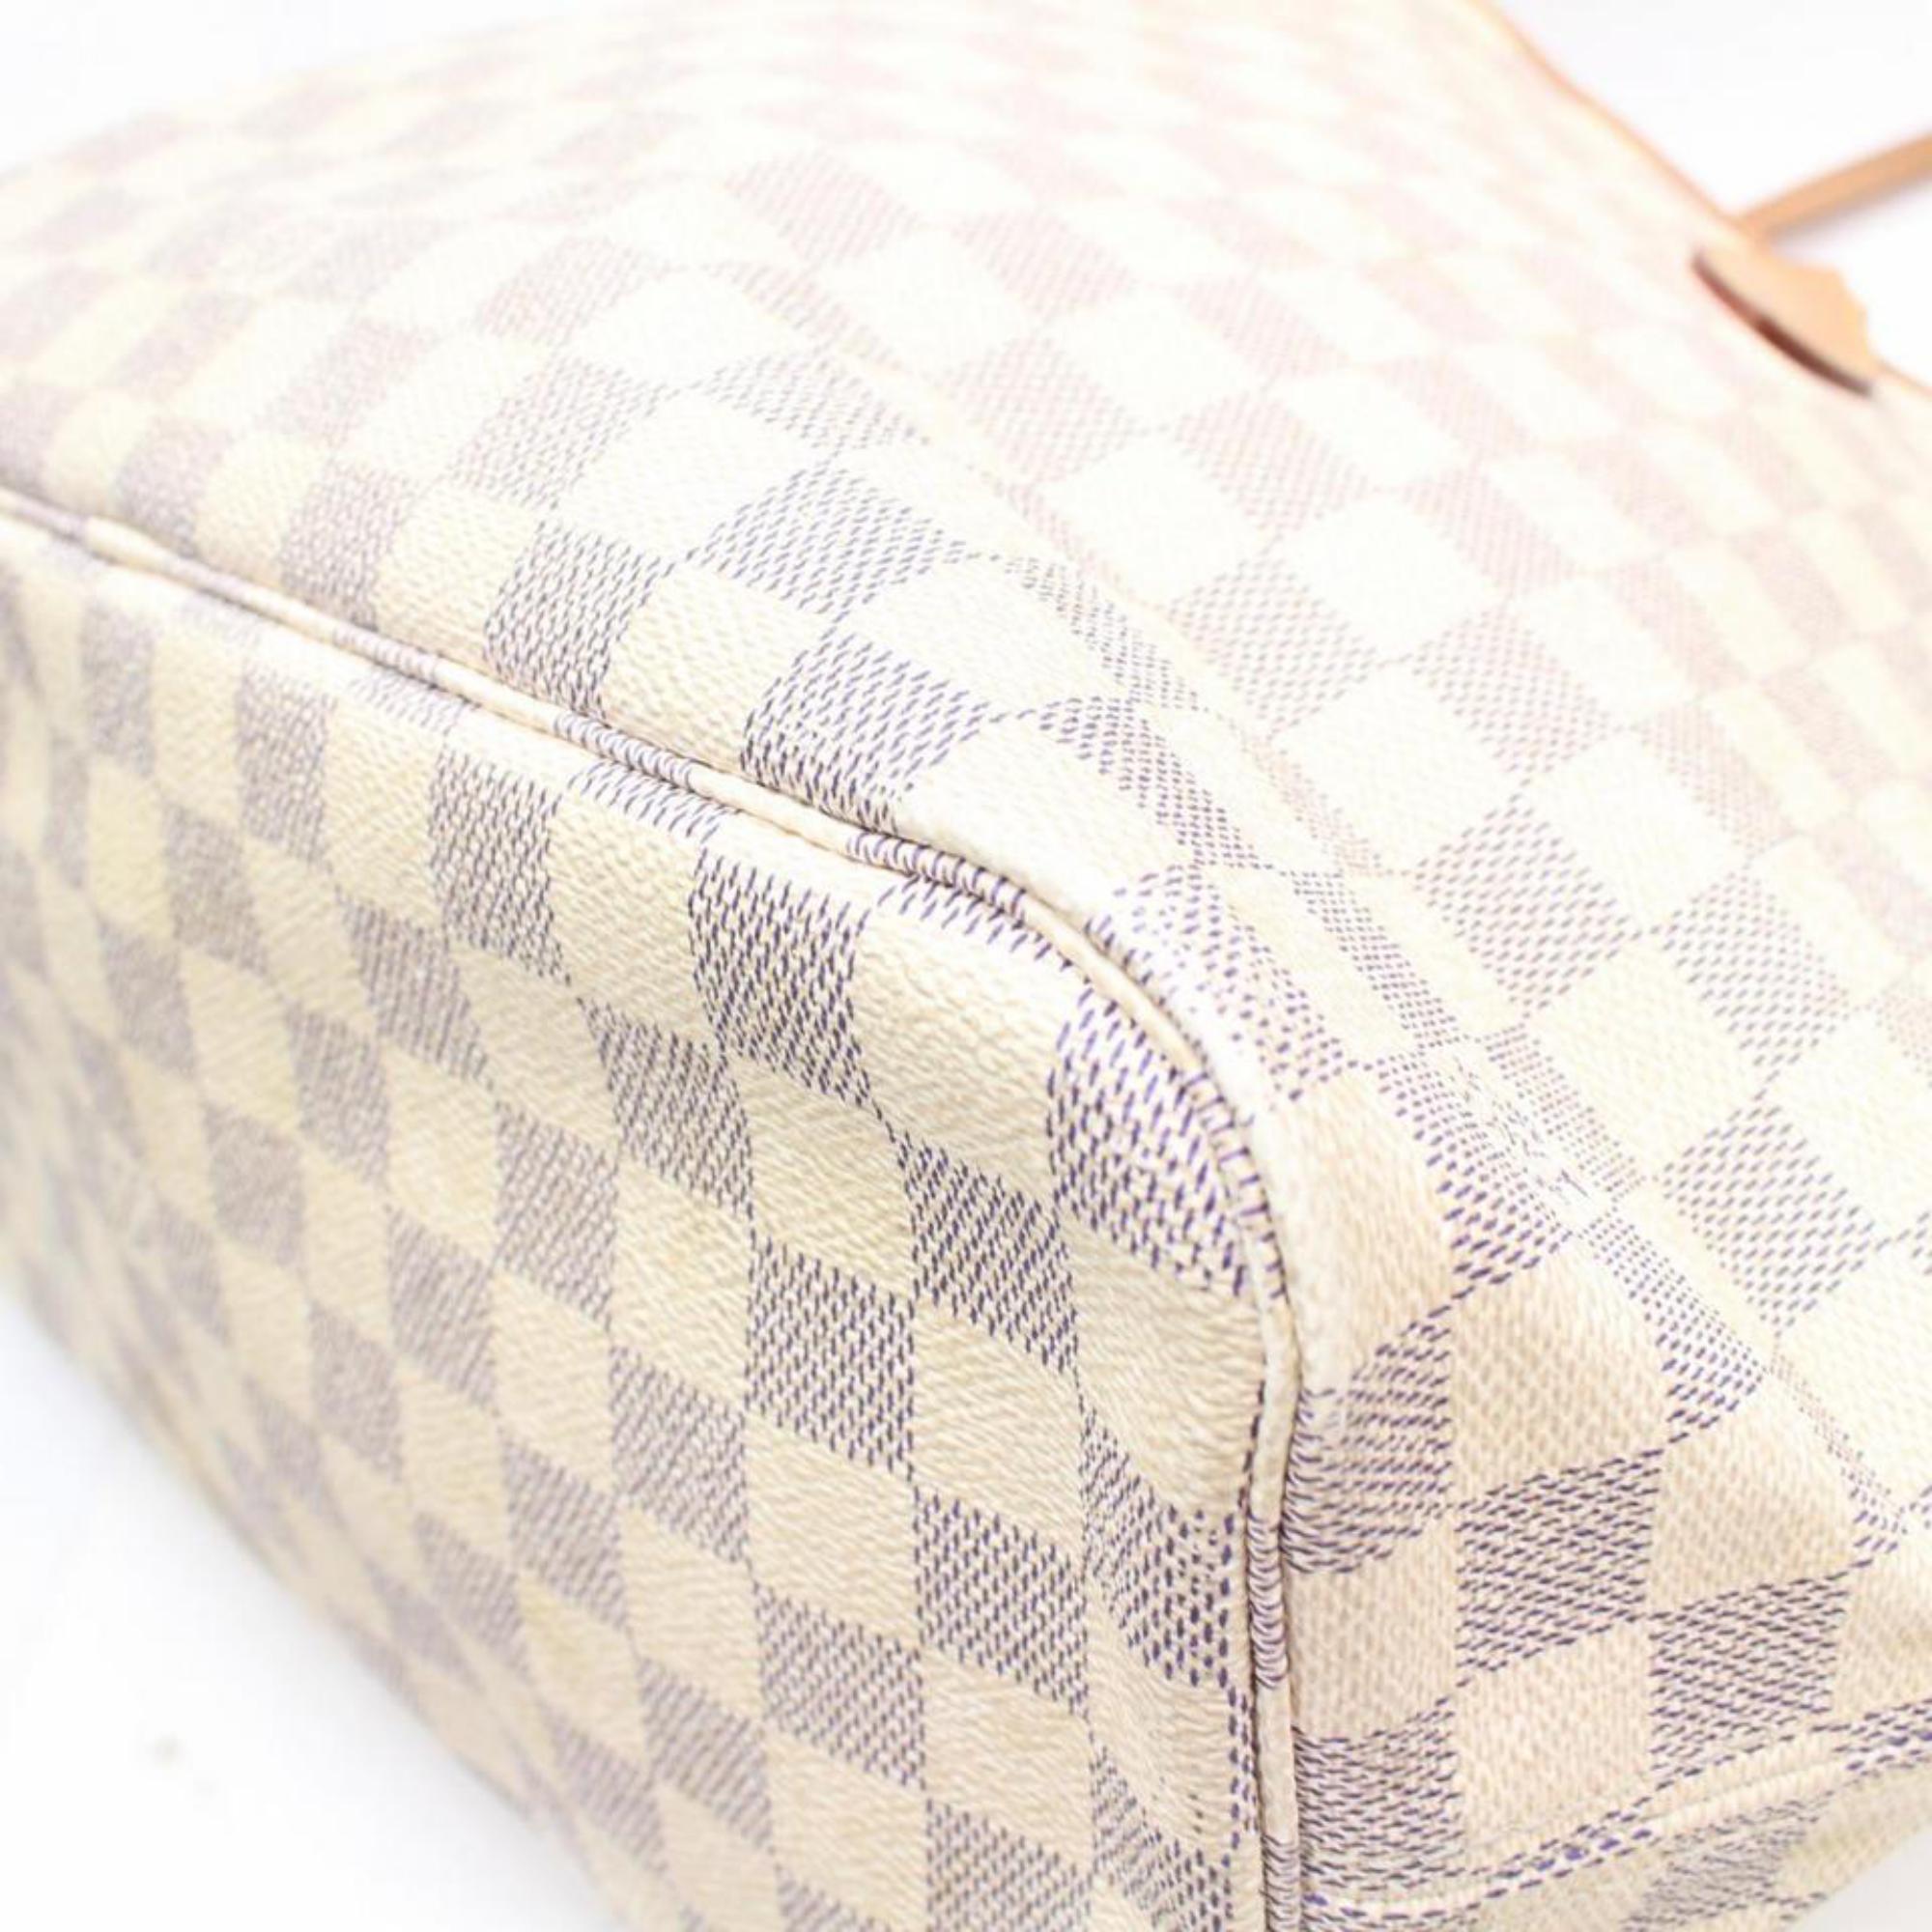 Louis Vuitton Neverfull Damier Azur Mm 869418 Whites Coated Canvas Tote For Sale 8